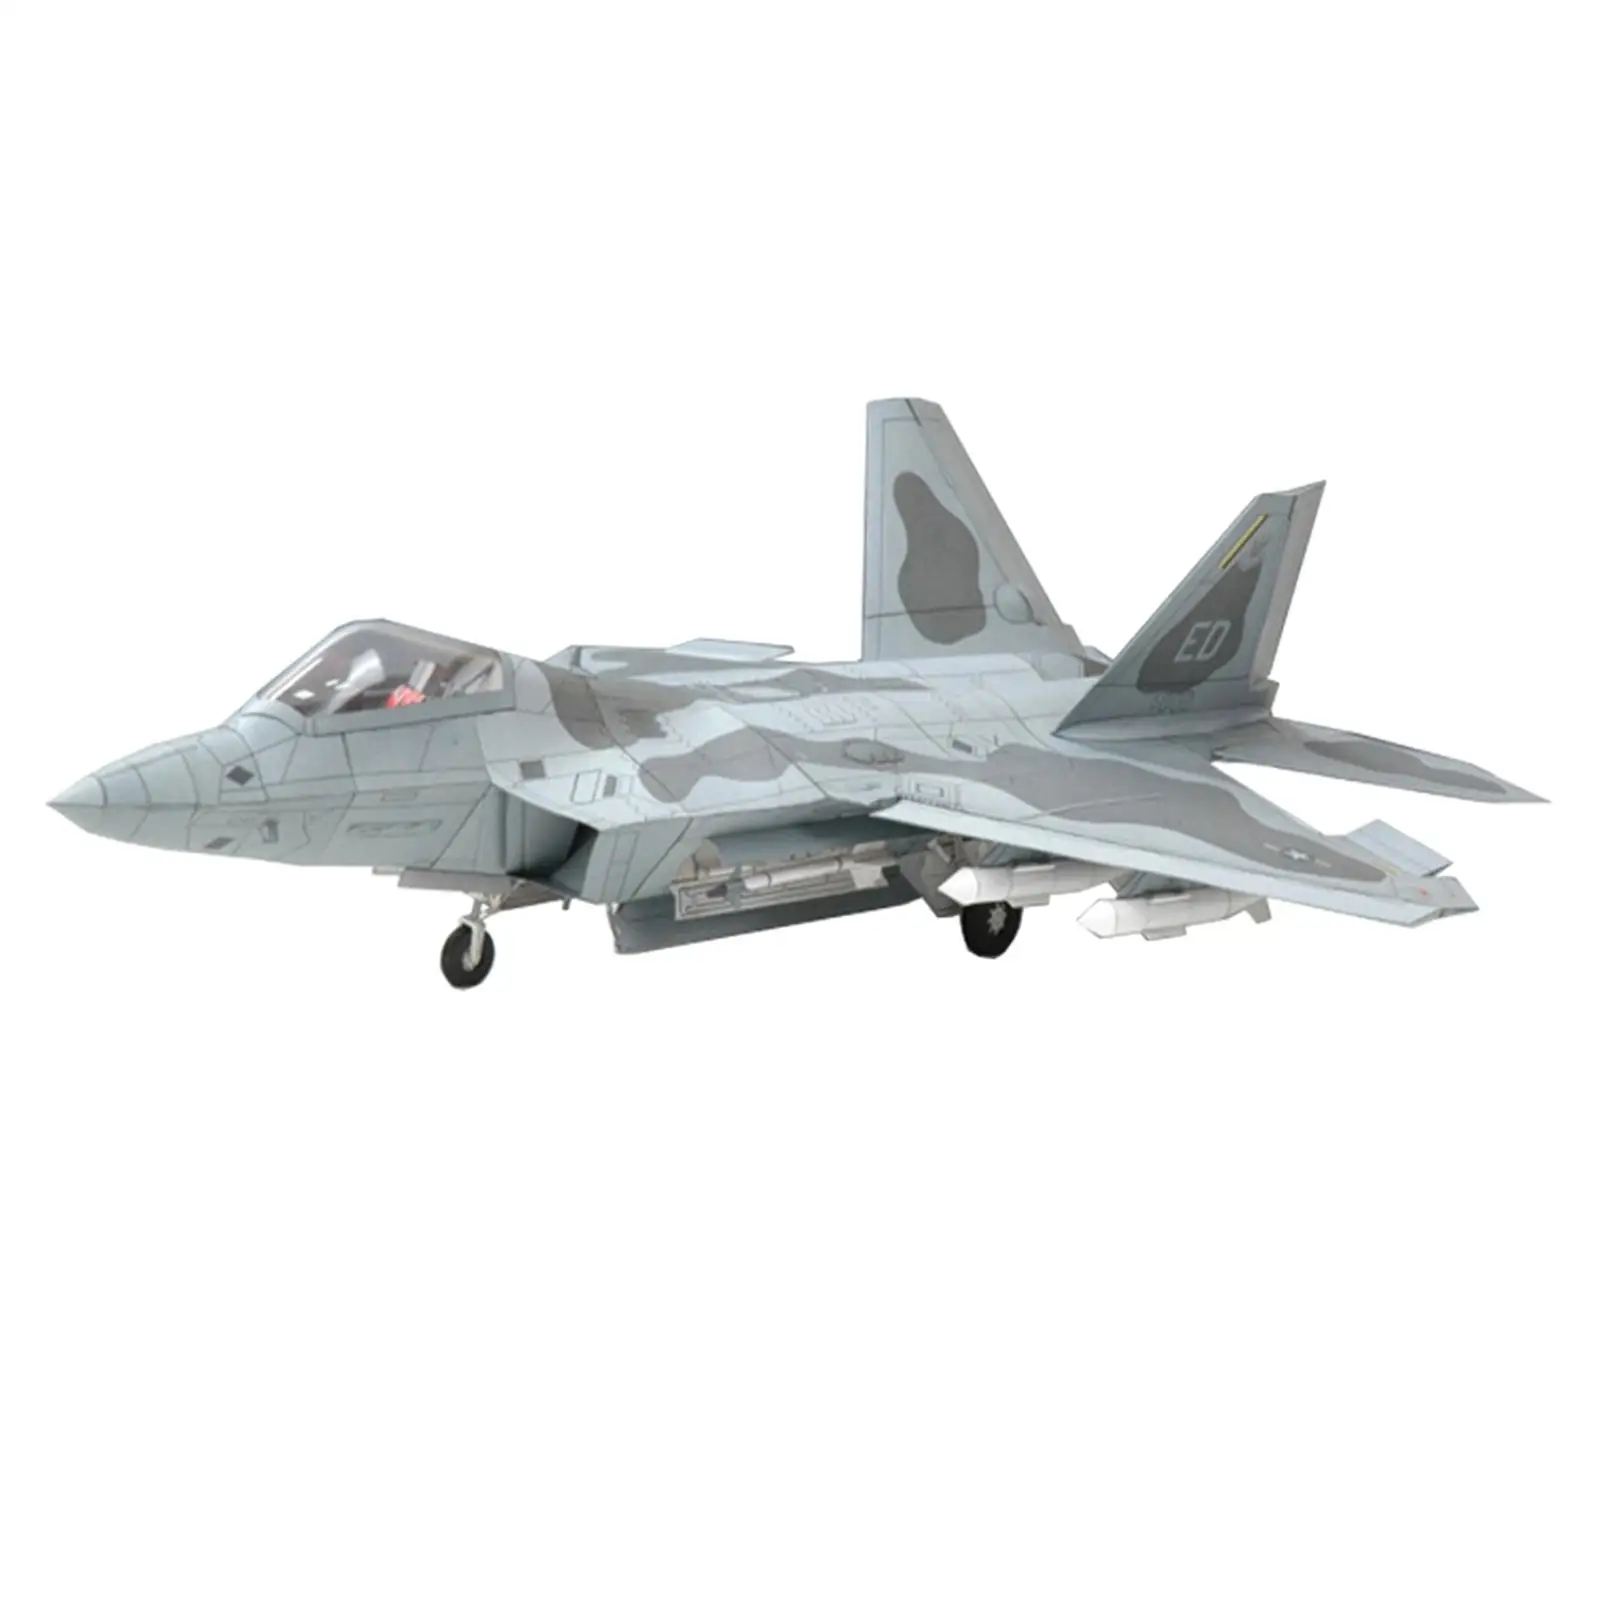 1/33 3D F22 Fighter Assemble Paper Model Kit Building Blocks DIY Toys Education Toys for Adults Kids Boys Gifts Tabletop Decor